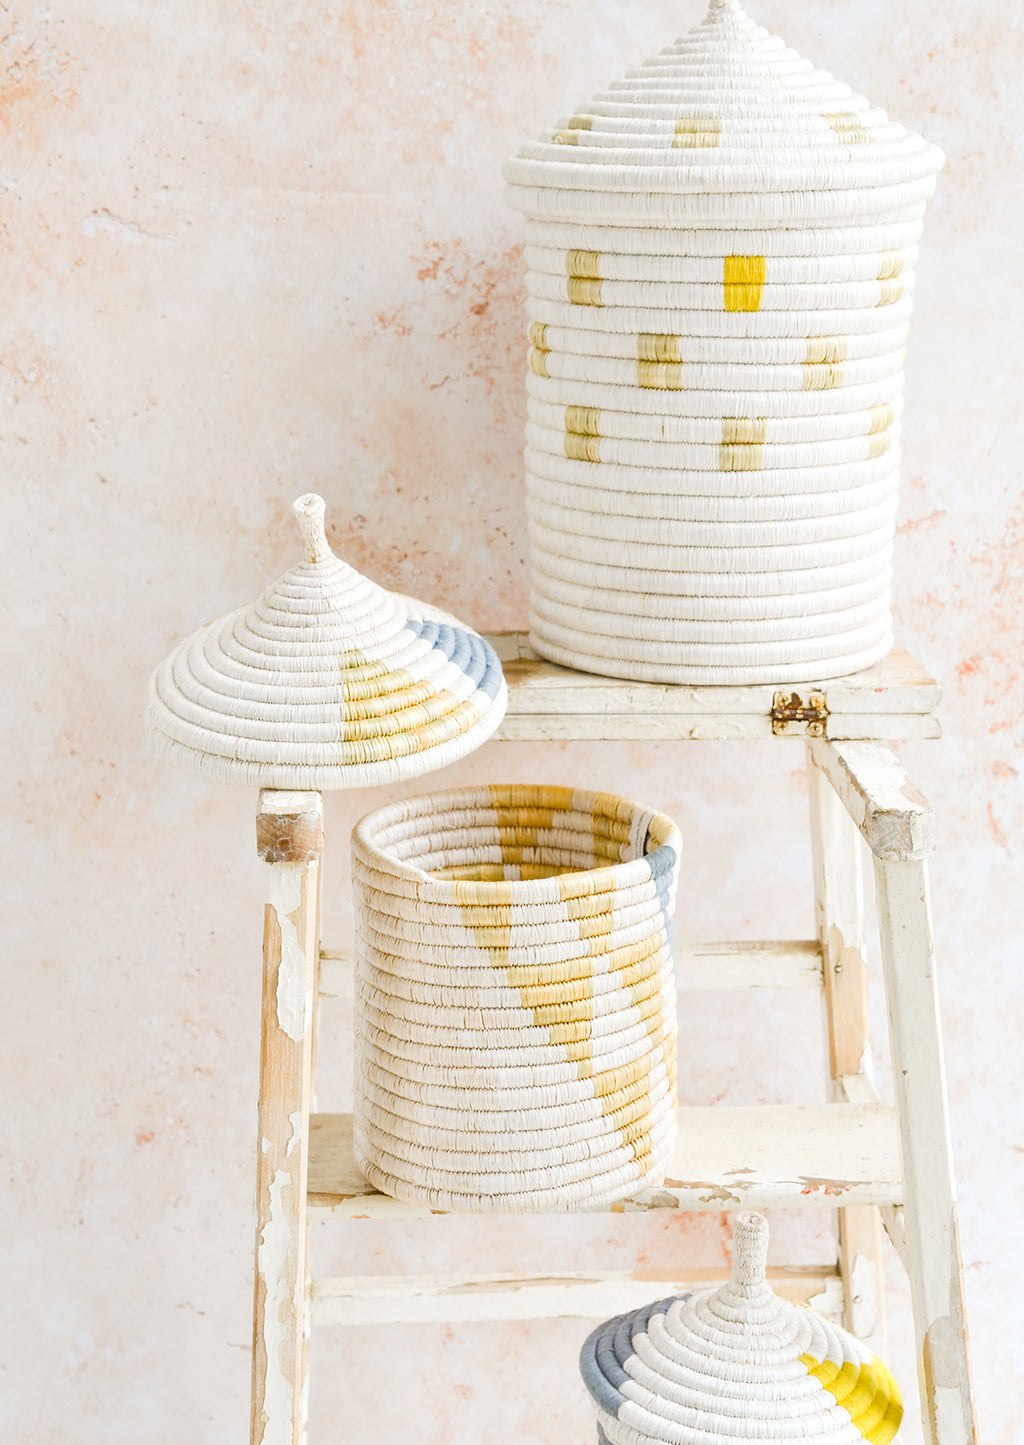 2: Assorted woven lidded baskets in three incremental sizes.